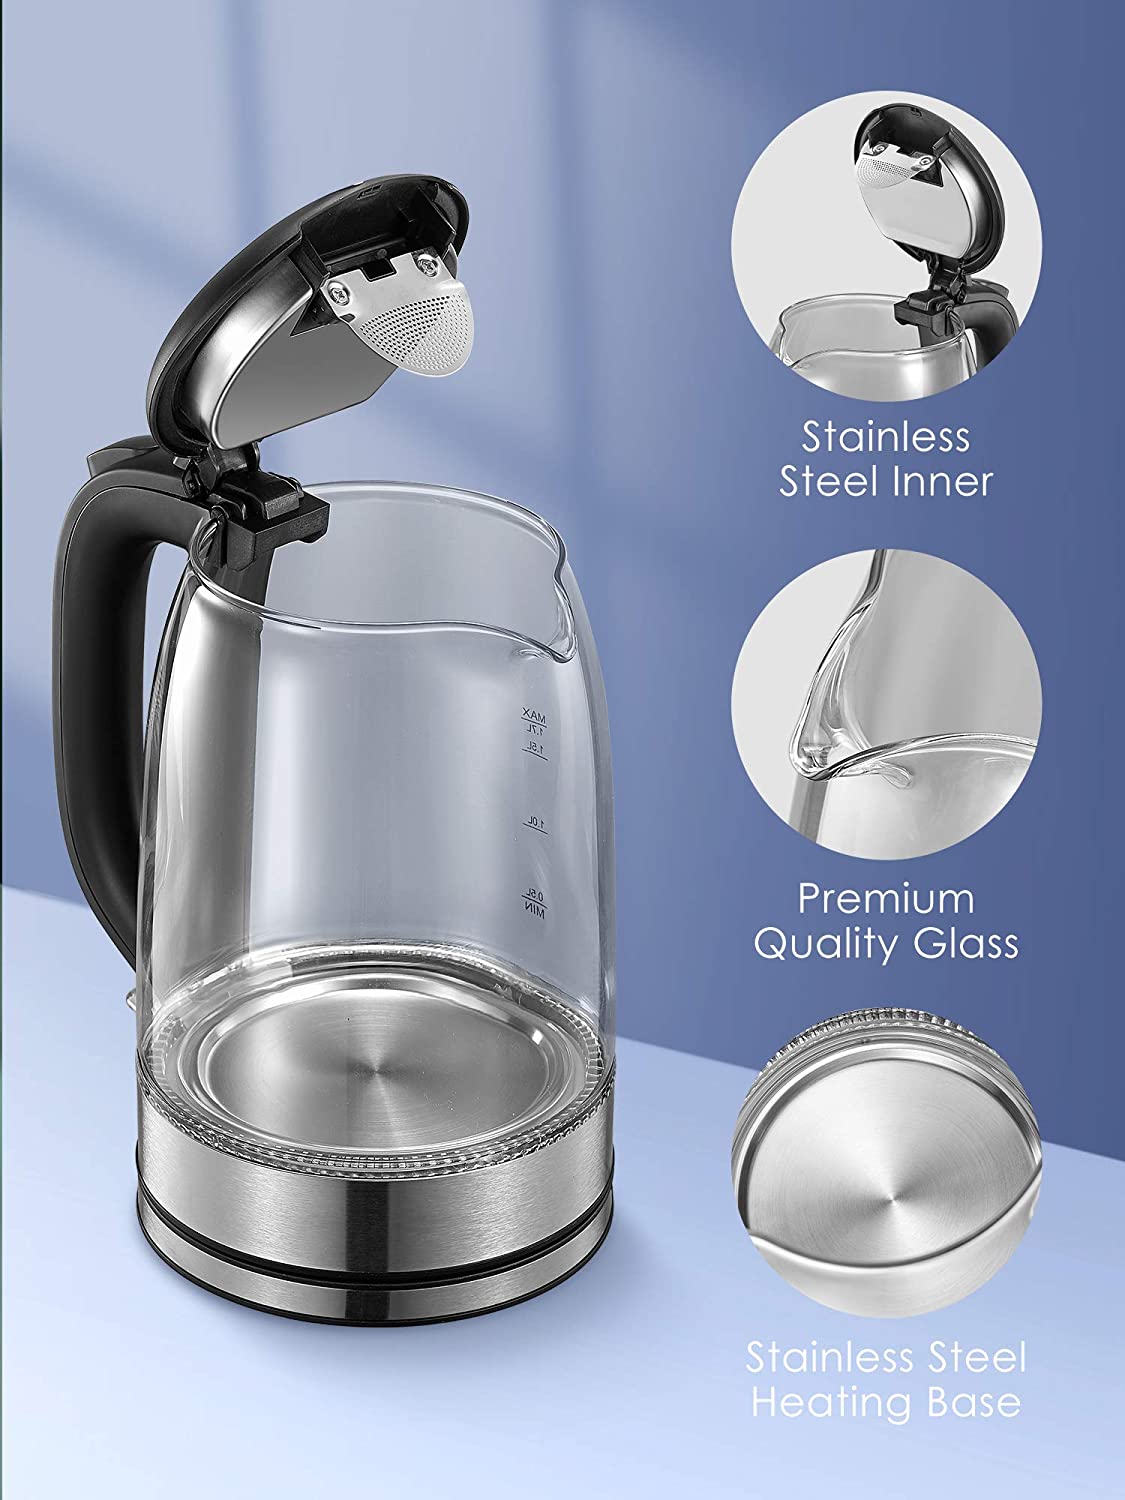 Electric Kettle 1.7L Glass Kettle with LED Indicator Lights, Fast